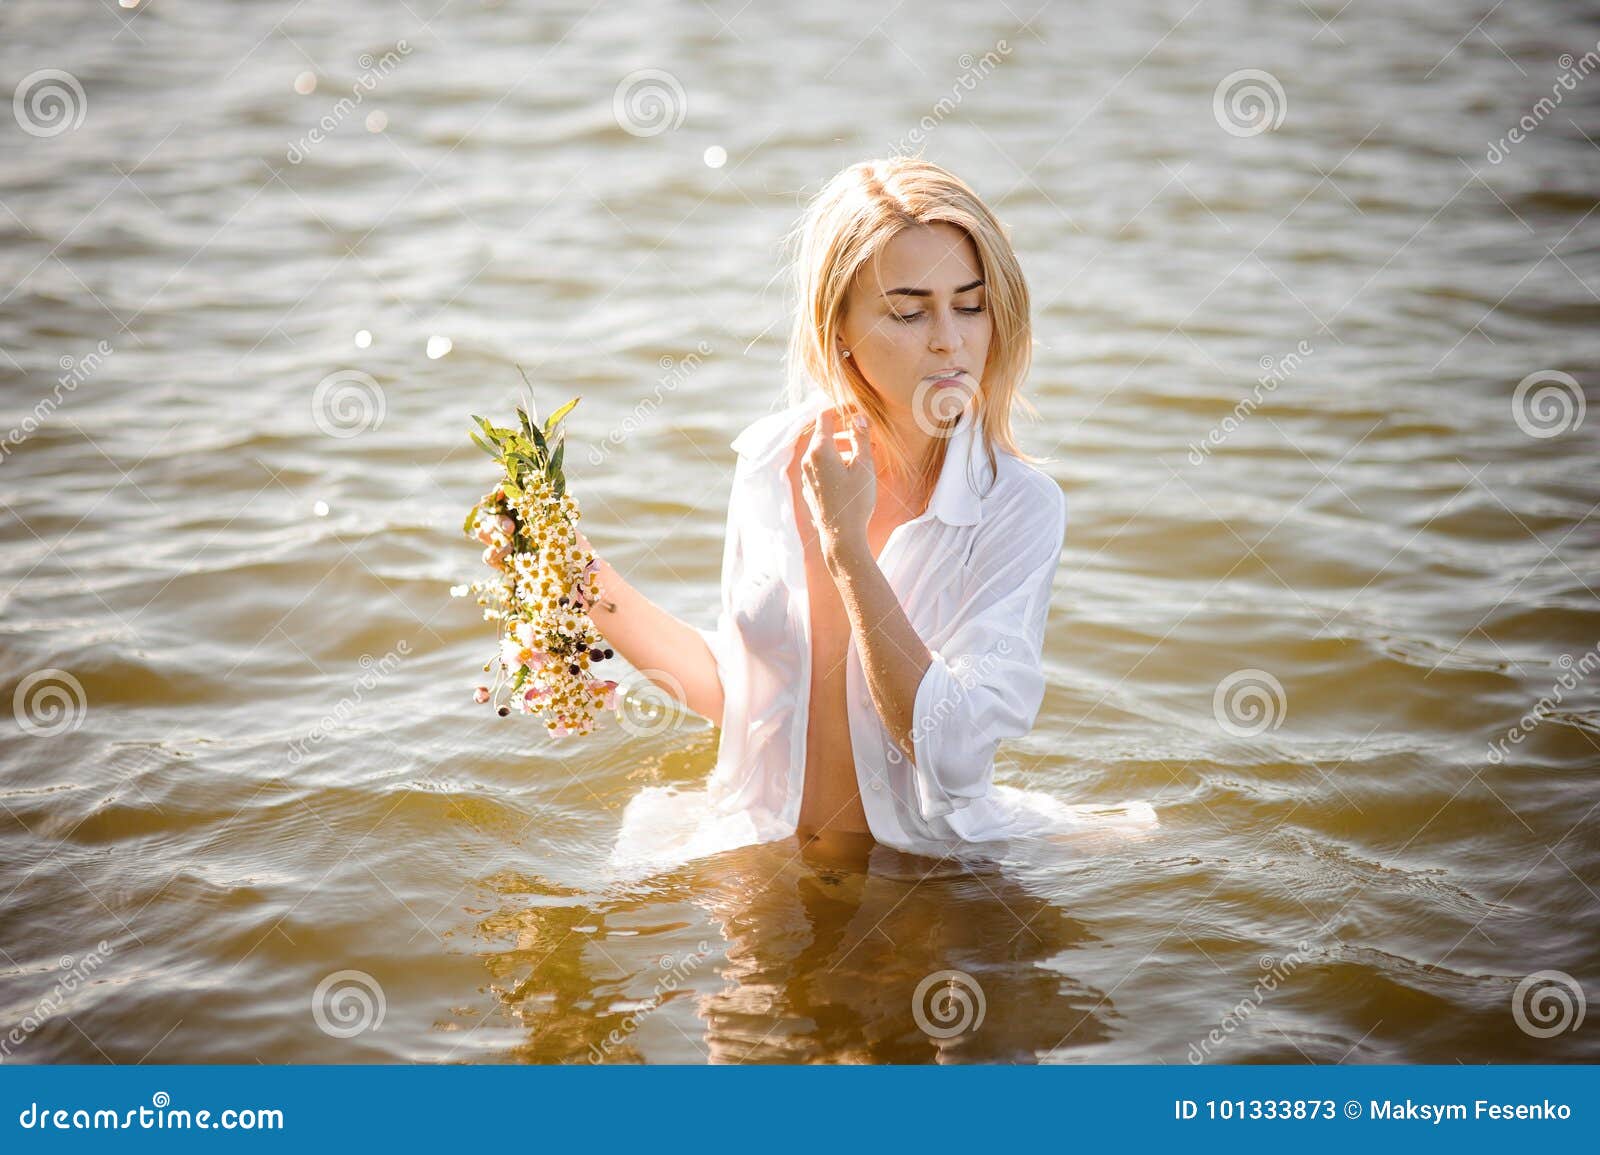 Nude Portrait Of Pretty Blond Girl In White Wet Shirt Stock Image